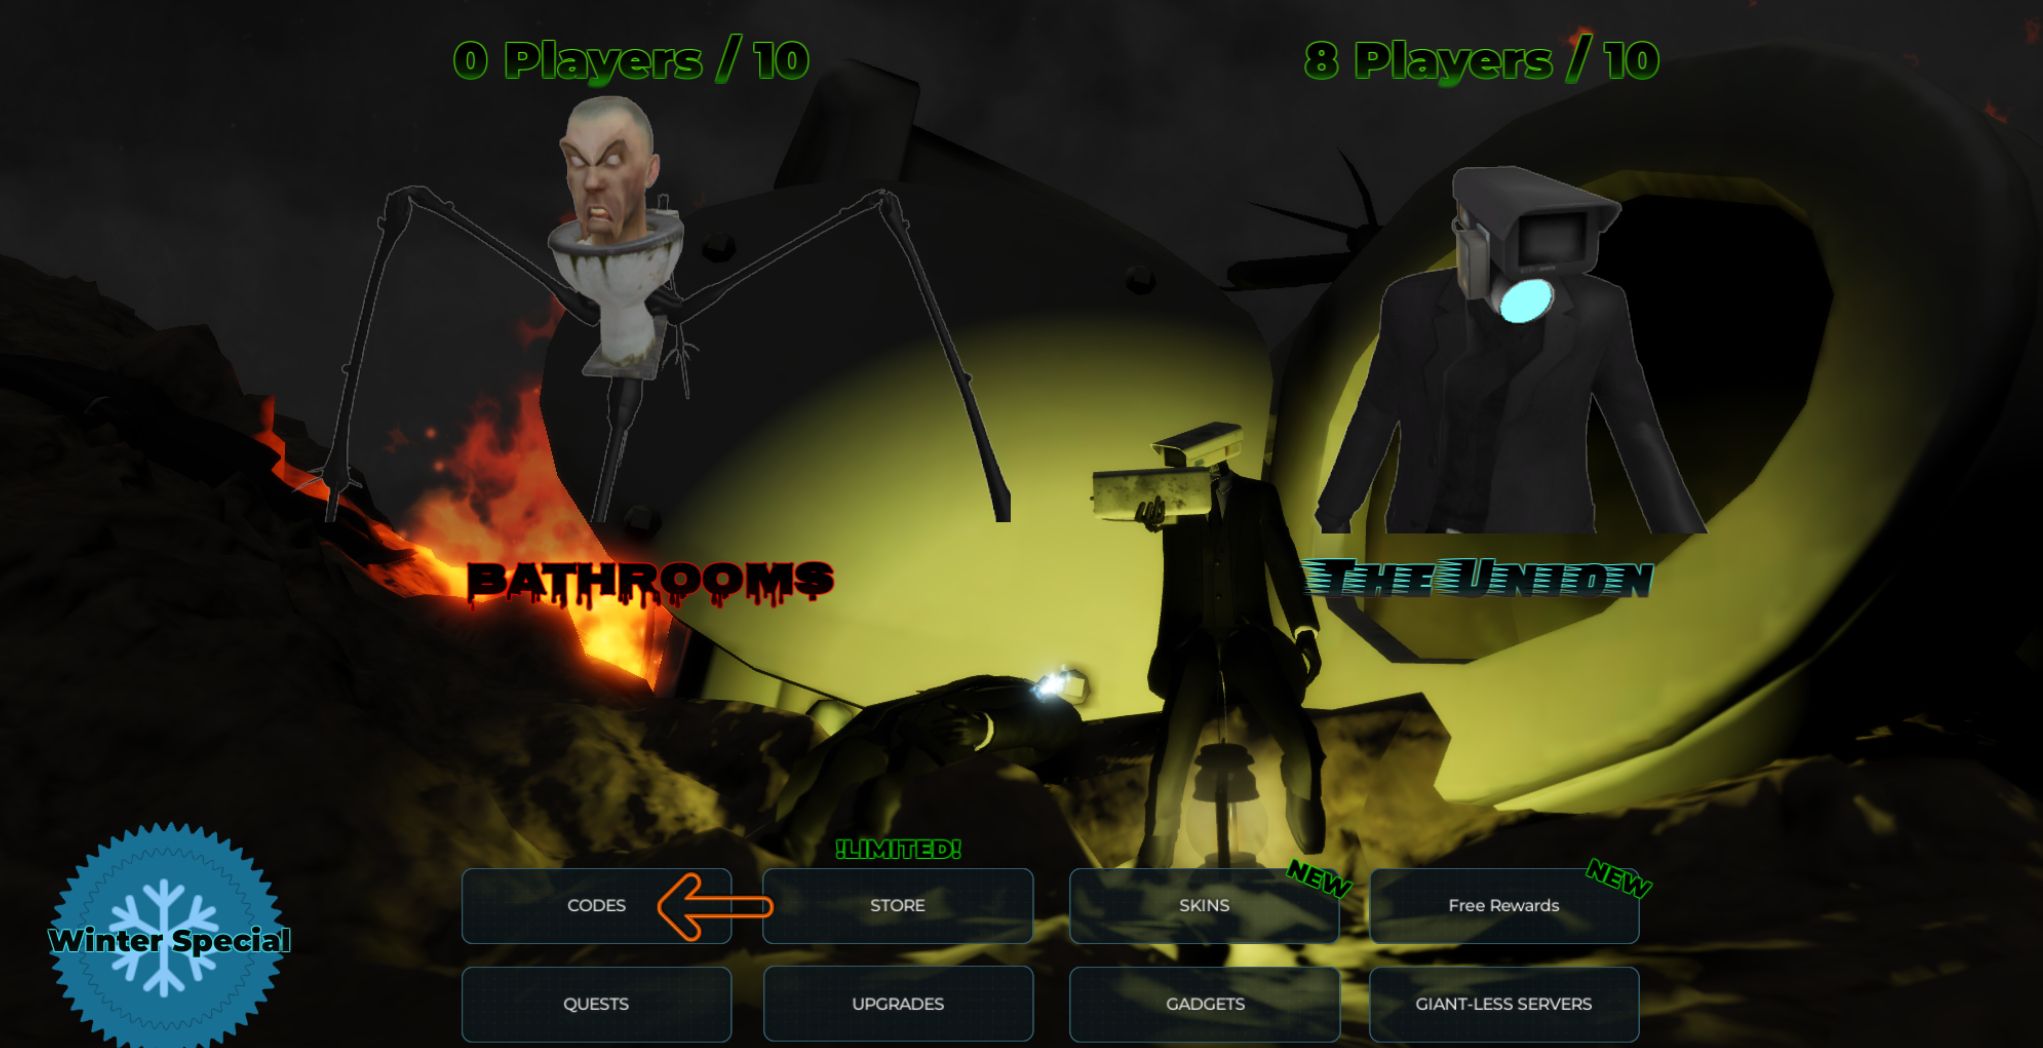 Roblox Ultimate Bathroom Battle - How to redeem codes